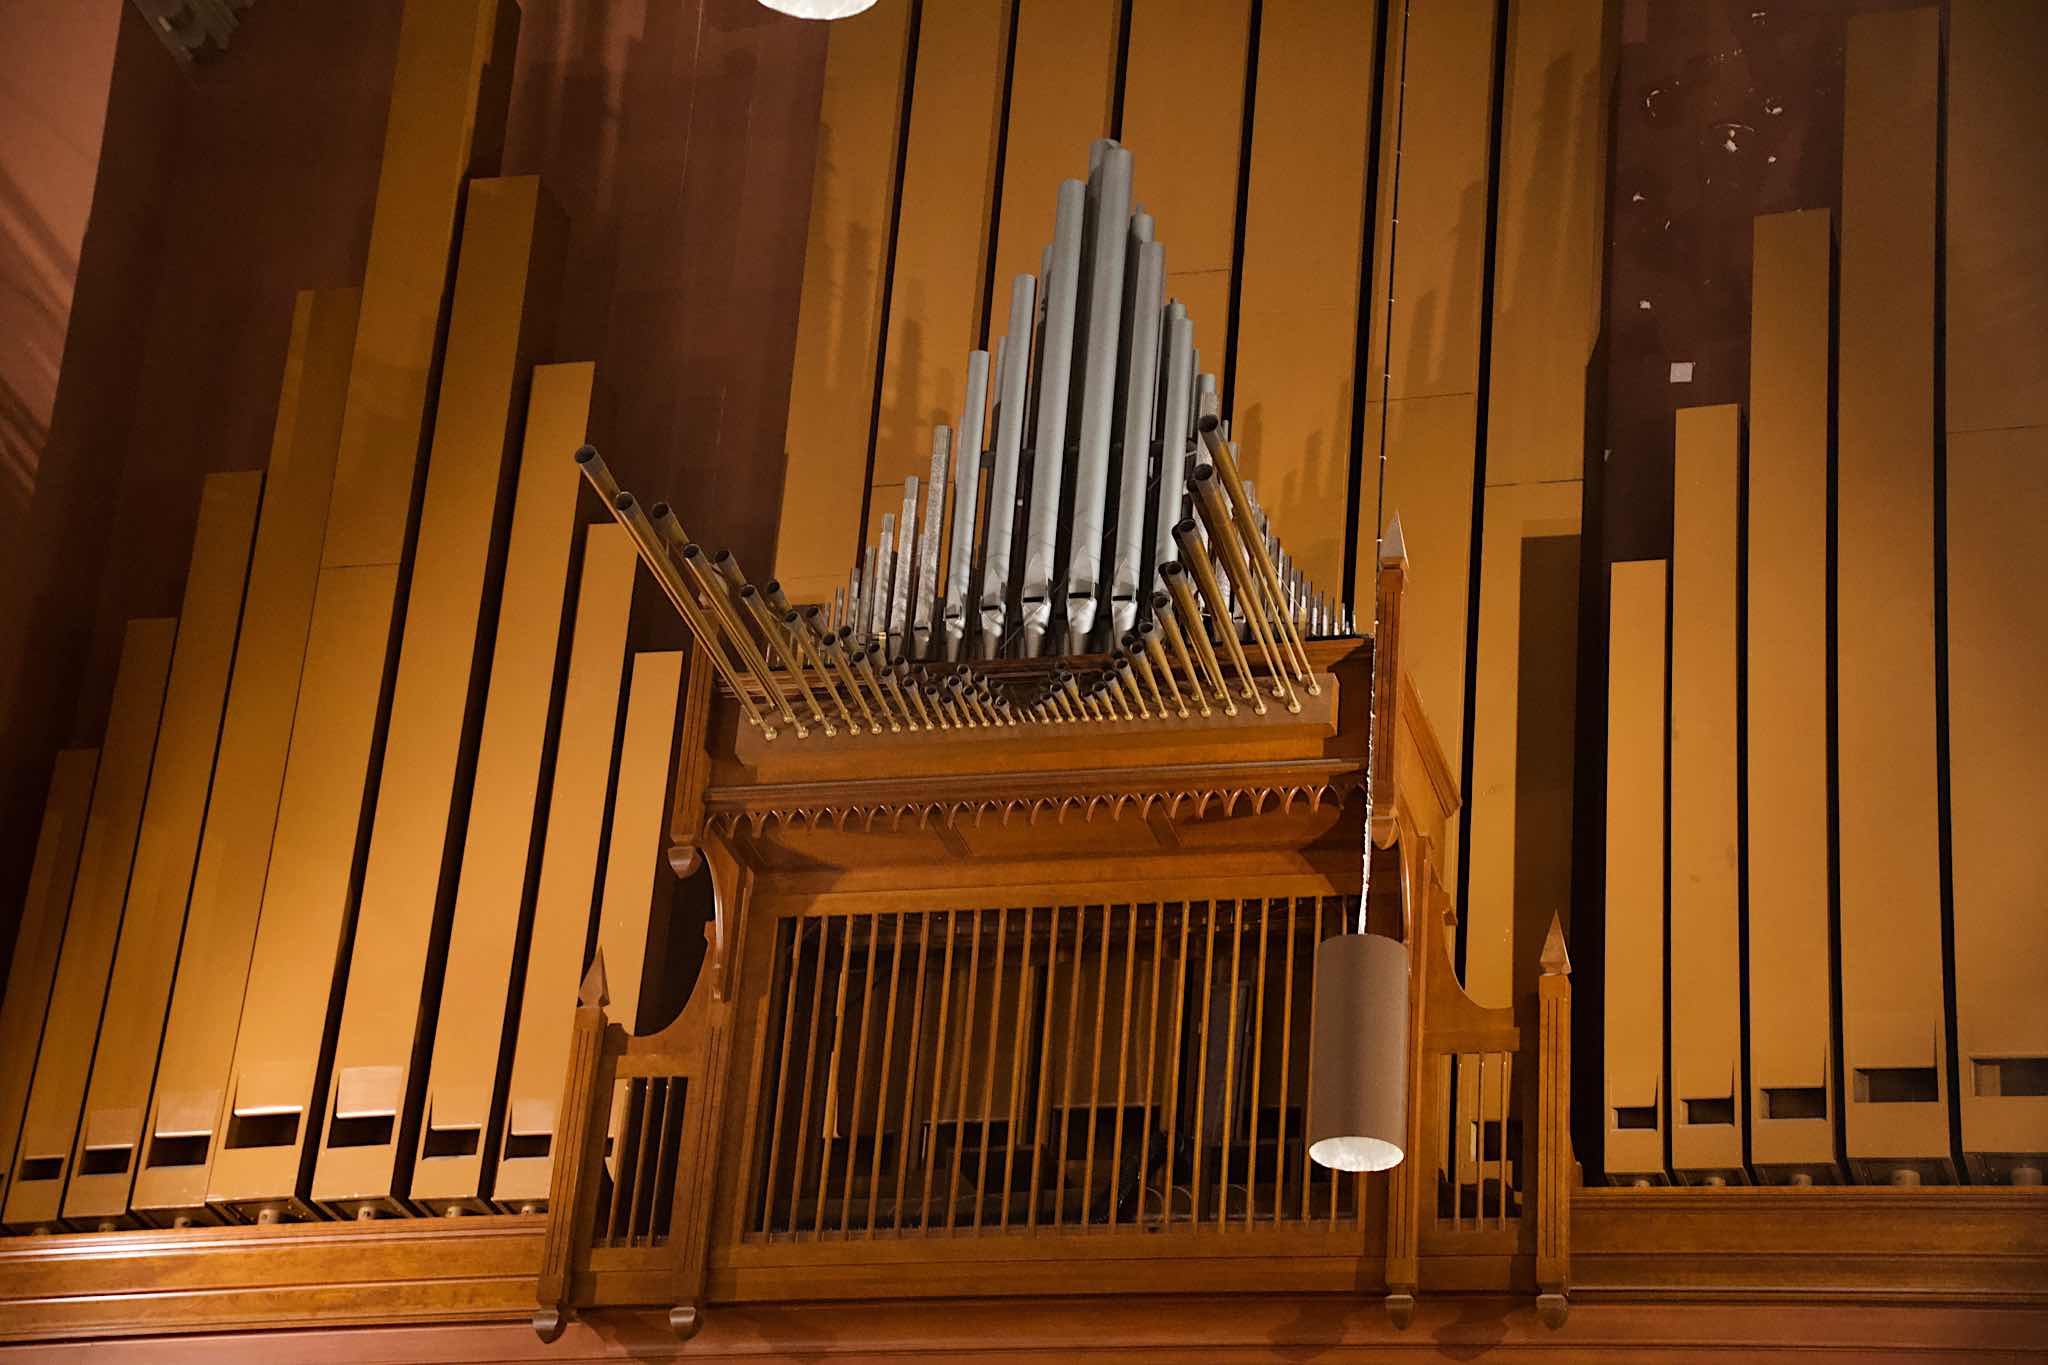 Pipes of the Old South Church's organ